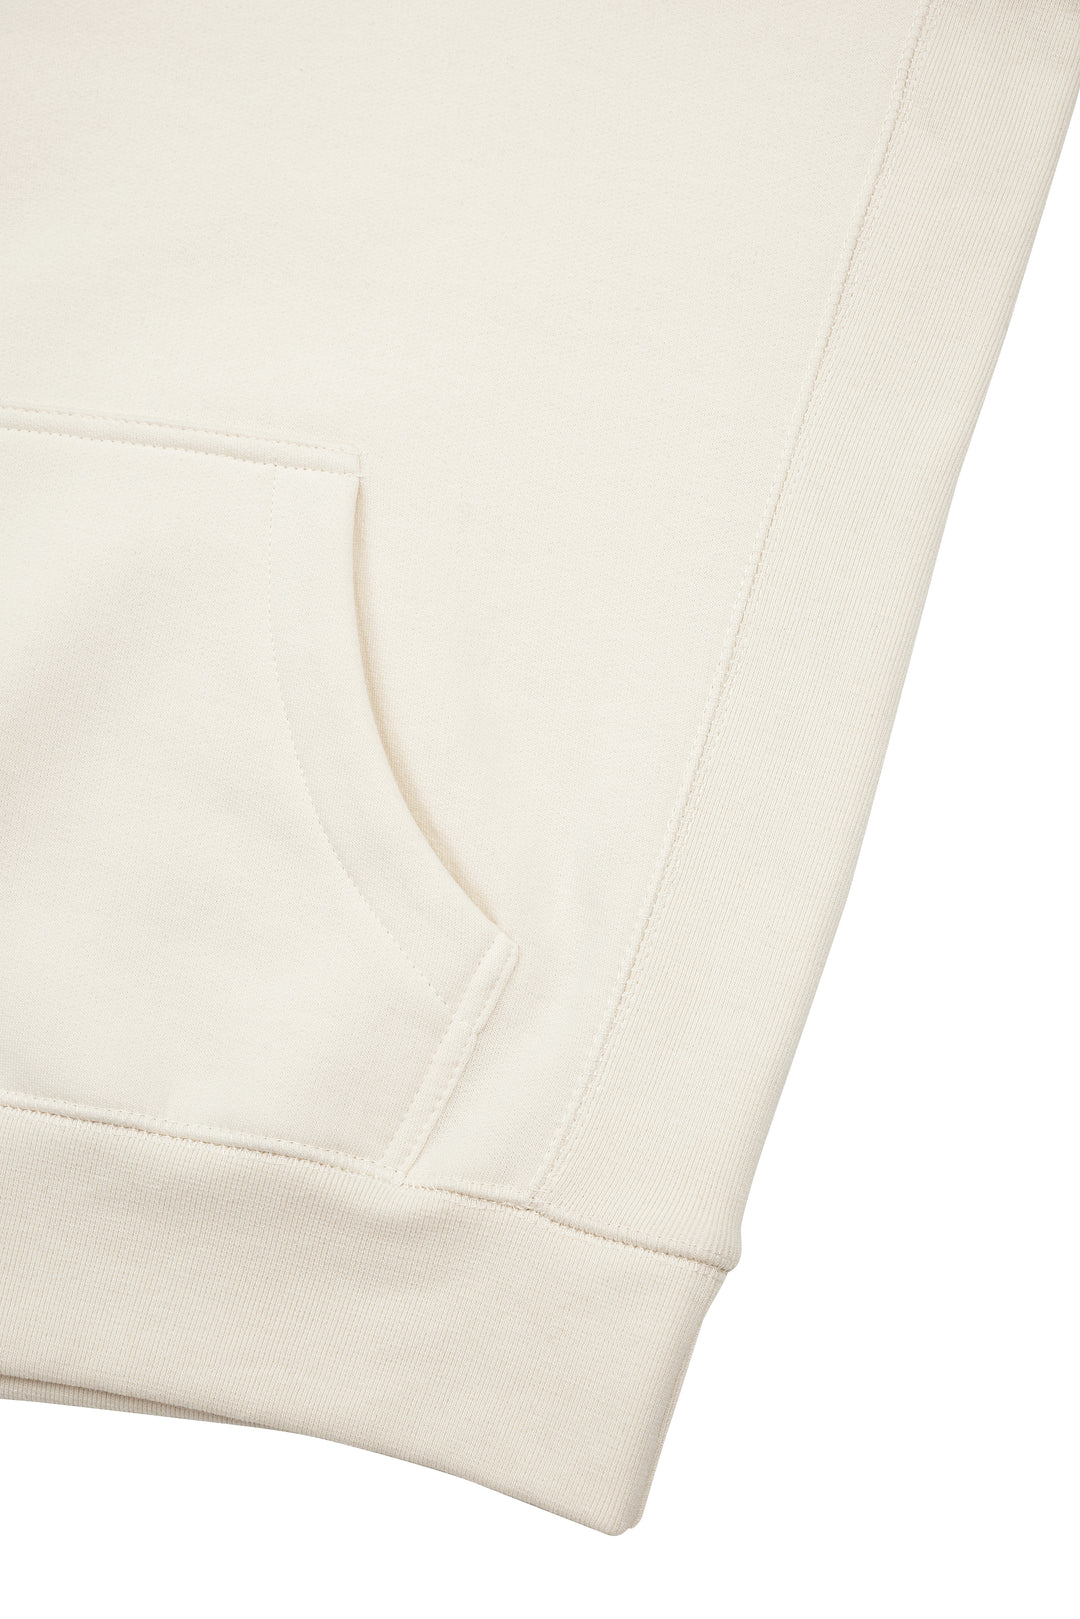 Detail of the Cream Colored Premium 400gsm Heavyweight Hoodie by RENOWNED WEAR